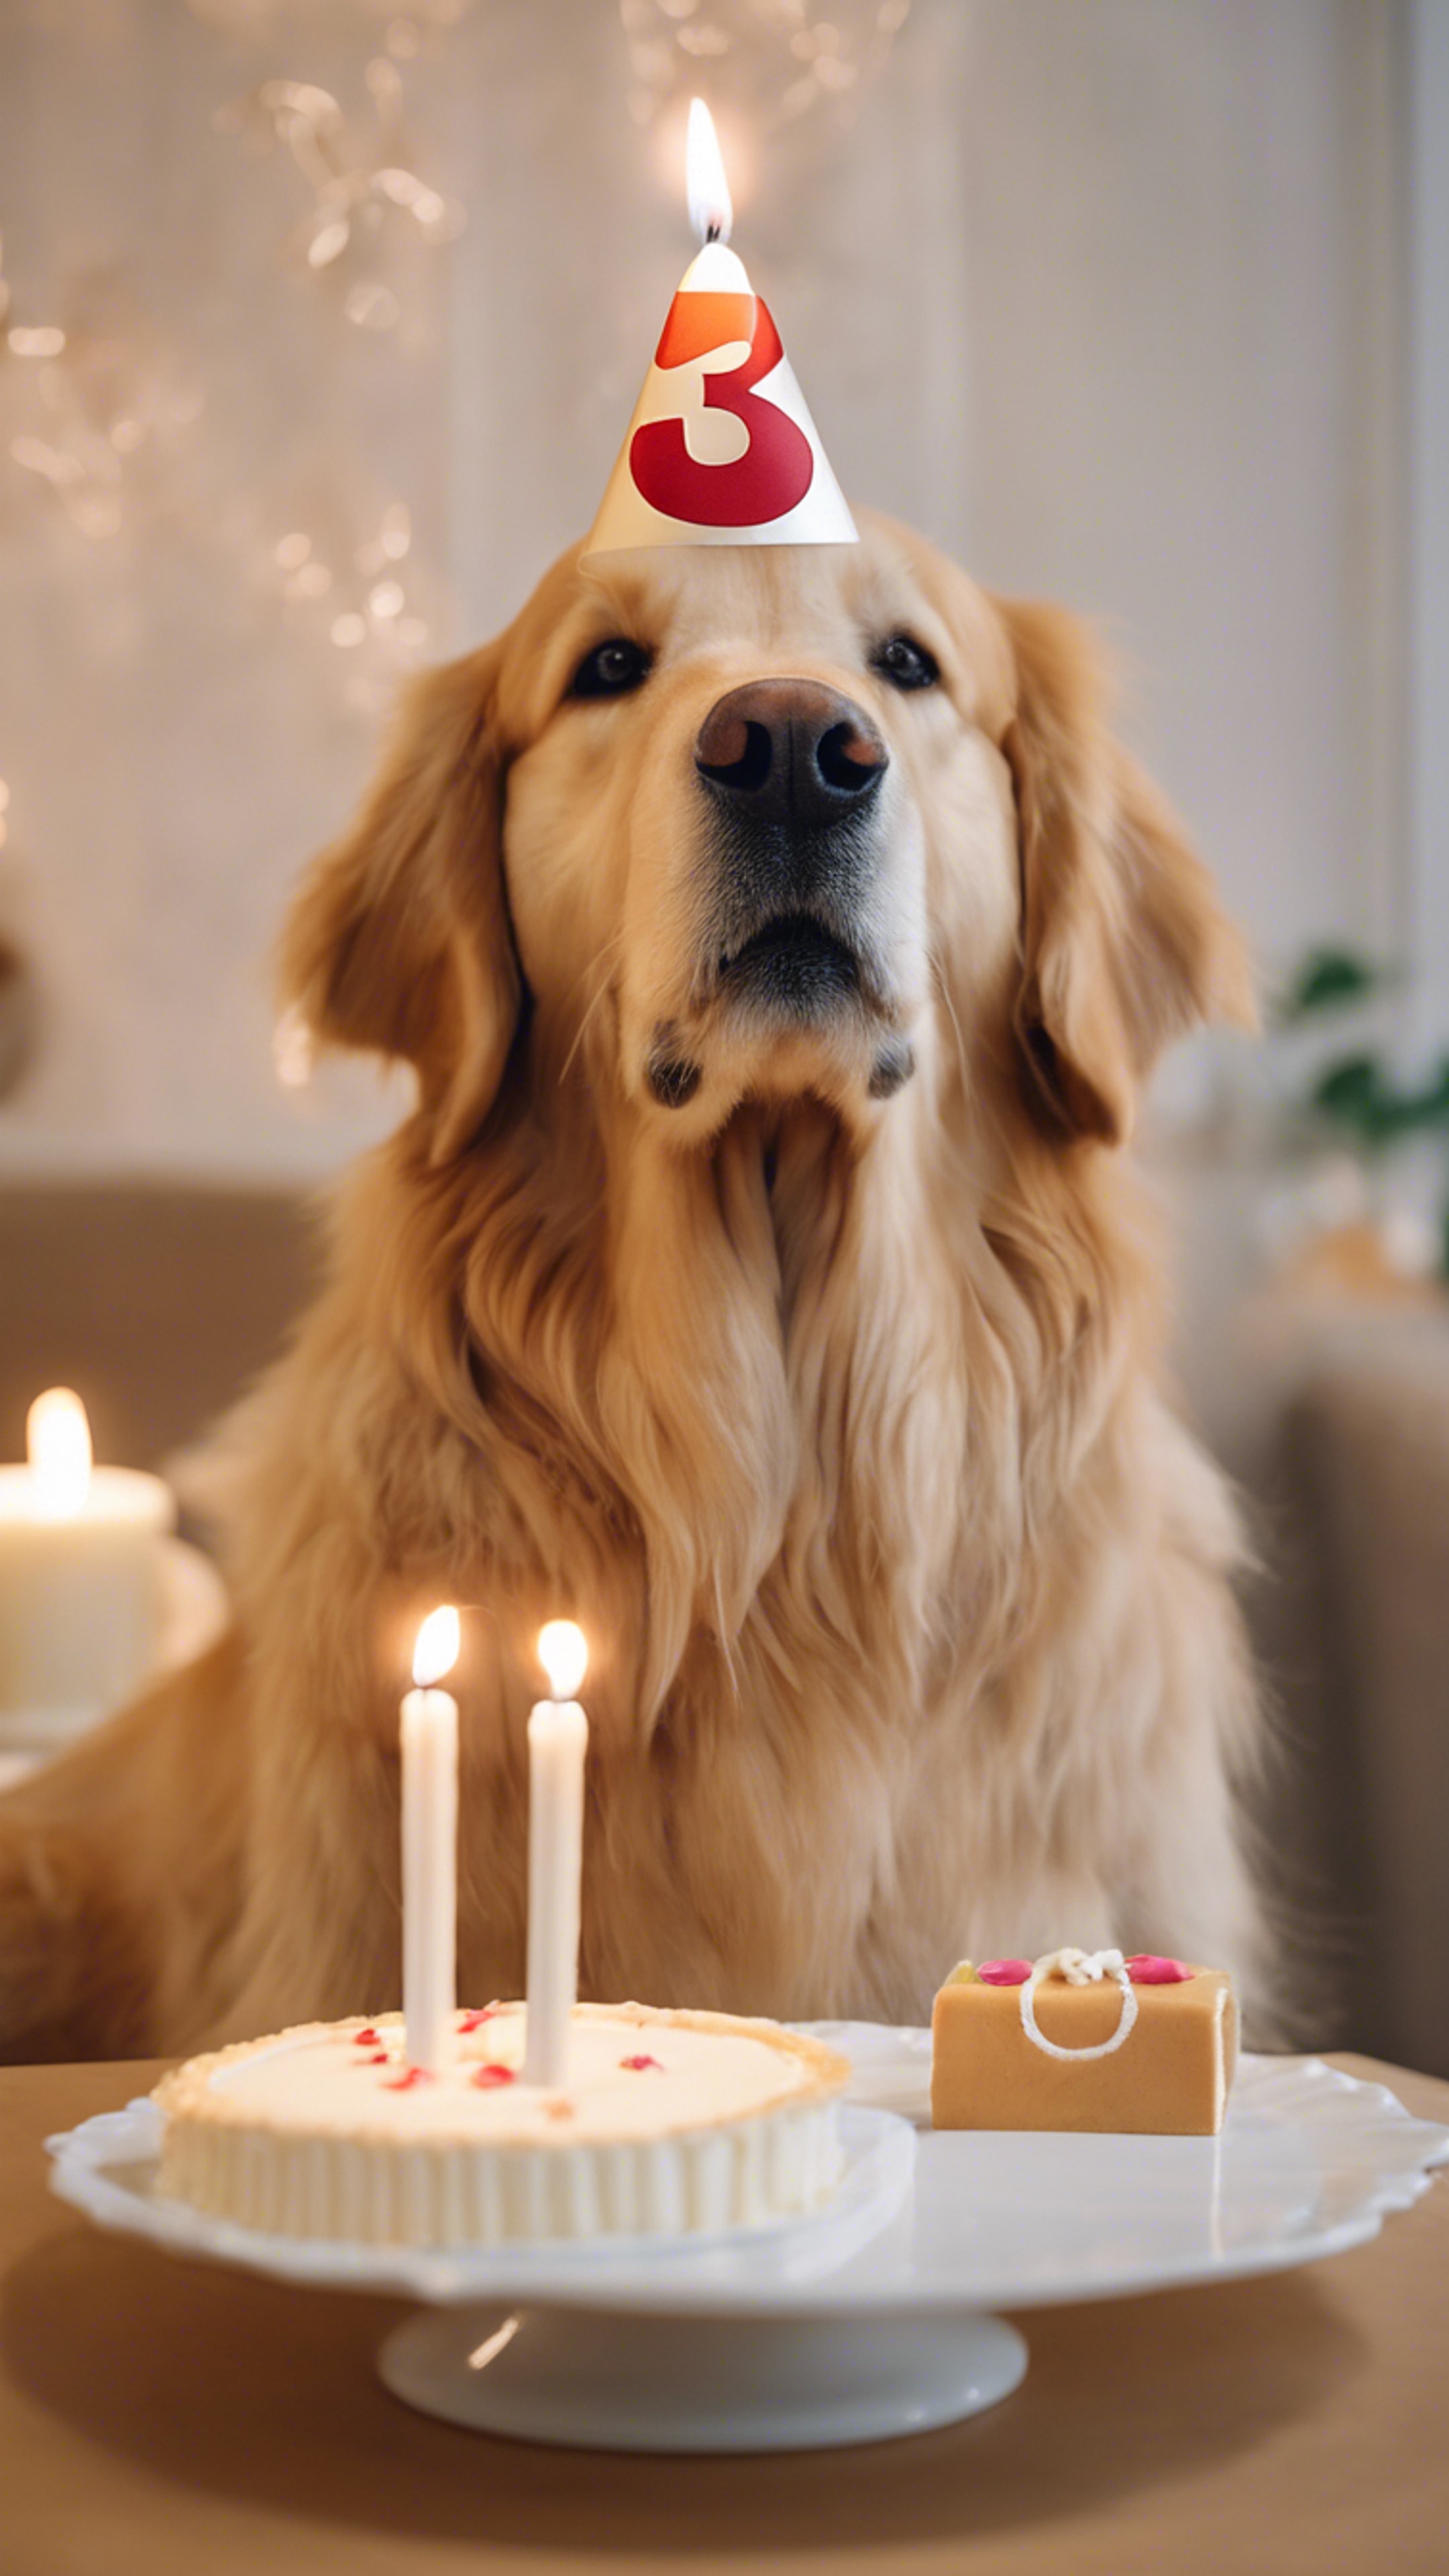 A golden retriever wearing a birthday hat, sitting in front of a numbered '3' candle on a small cake, looking eagerly at the camera. Wallpaper[271fe240b95e4af1b864]